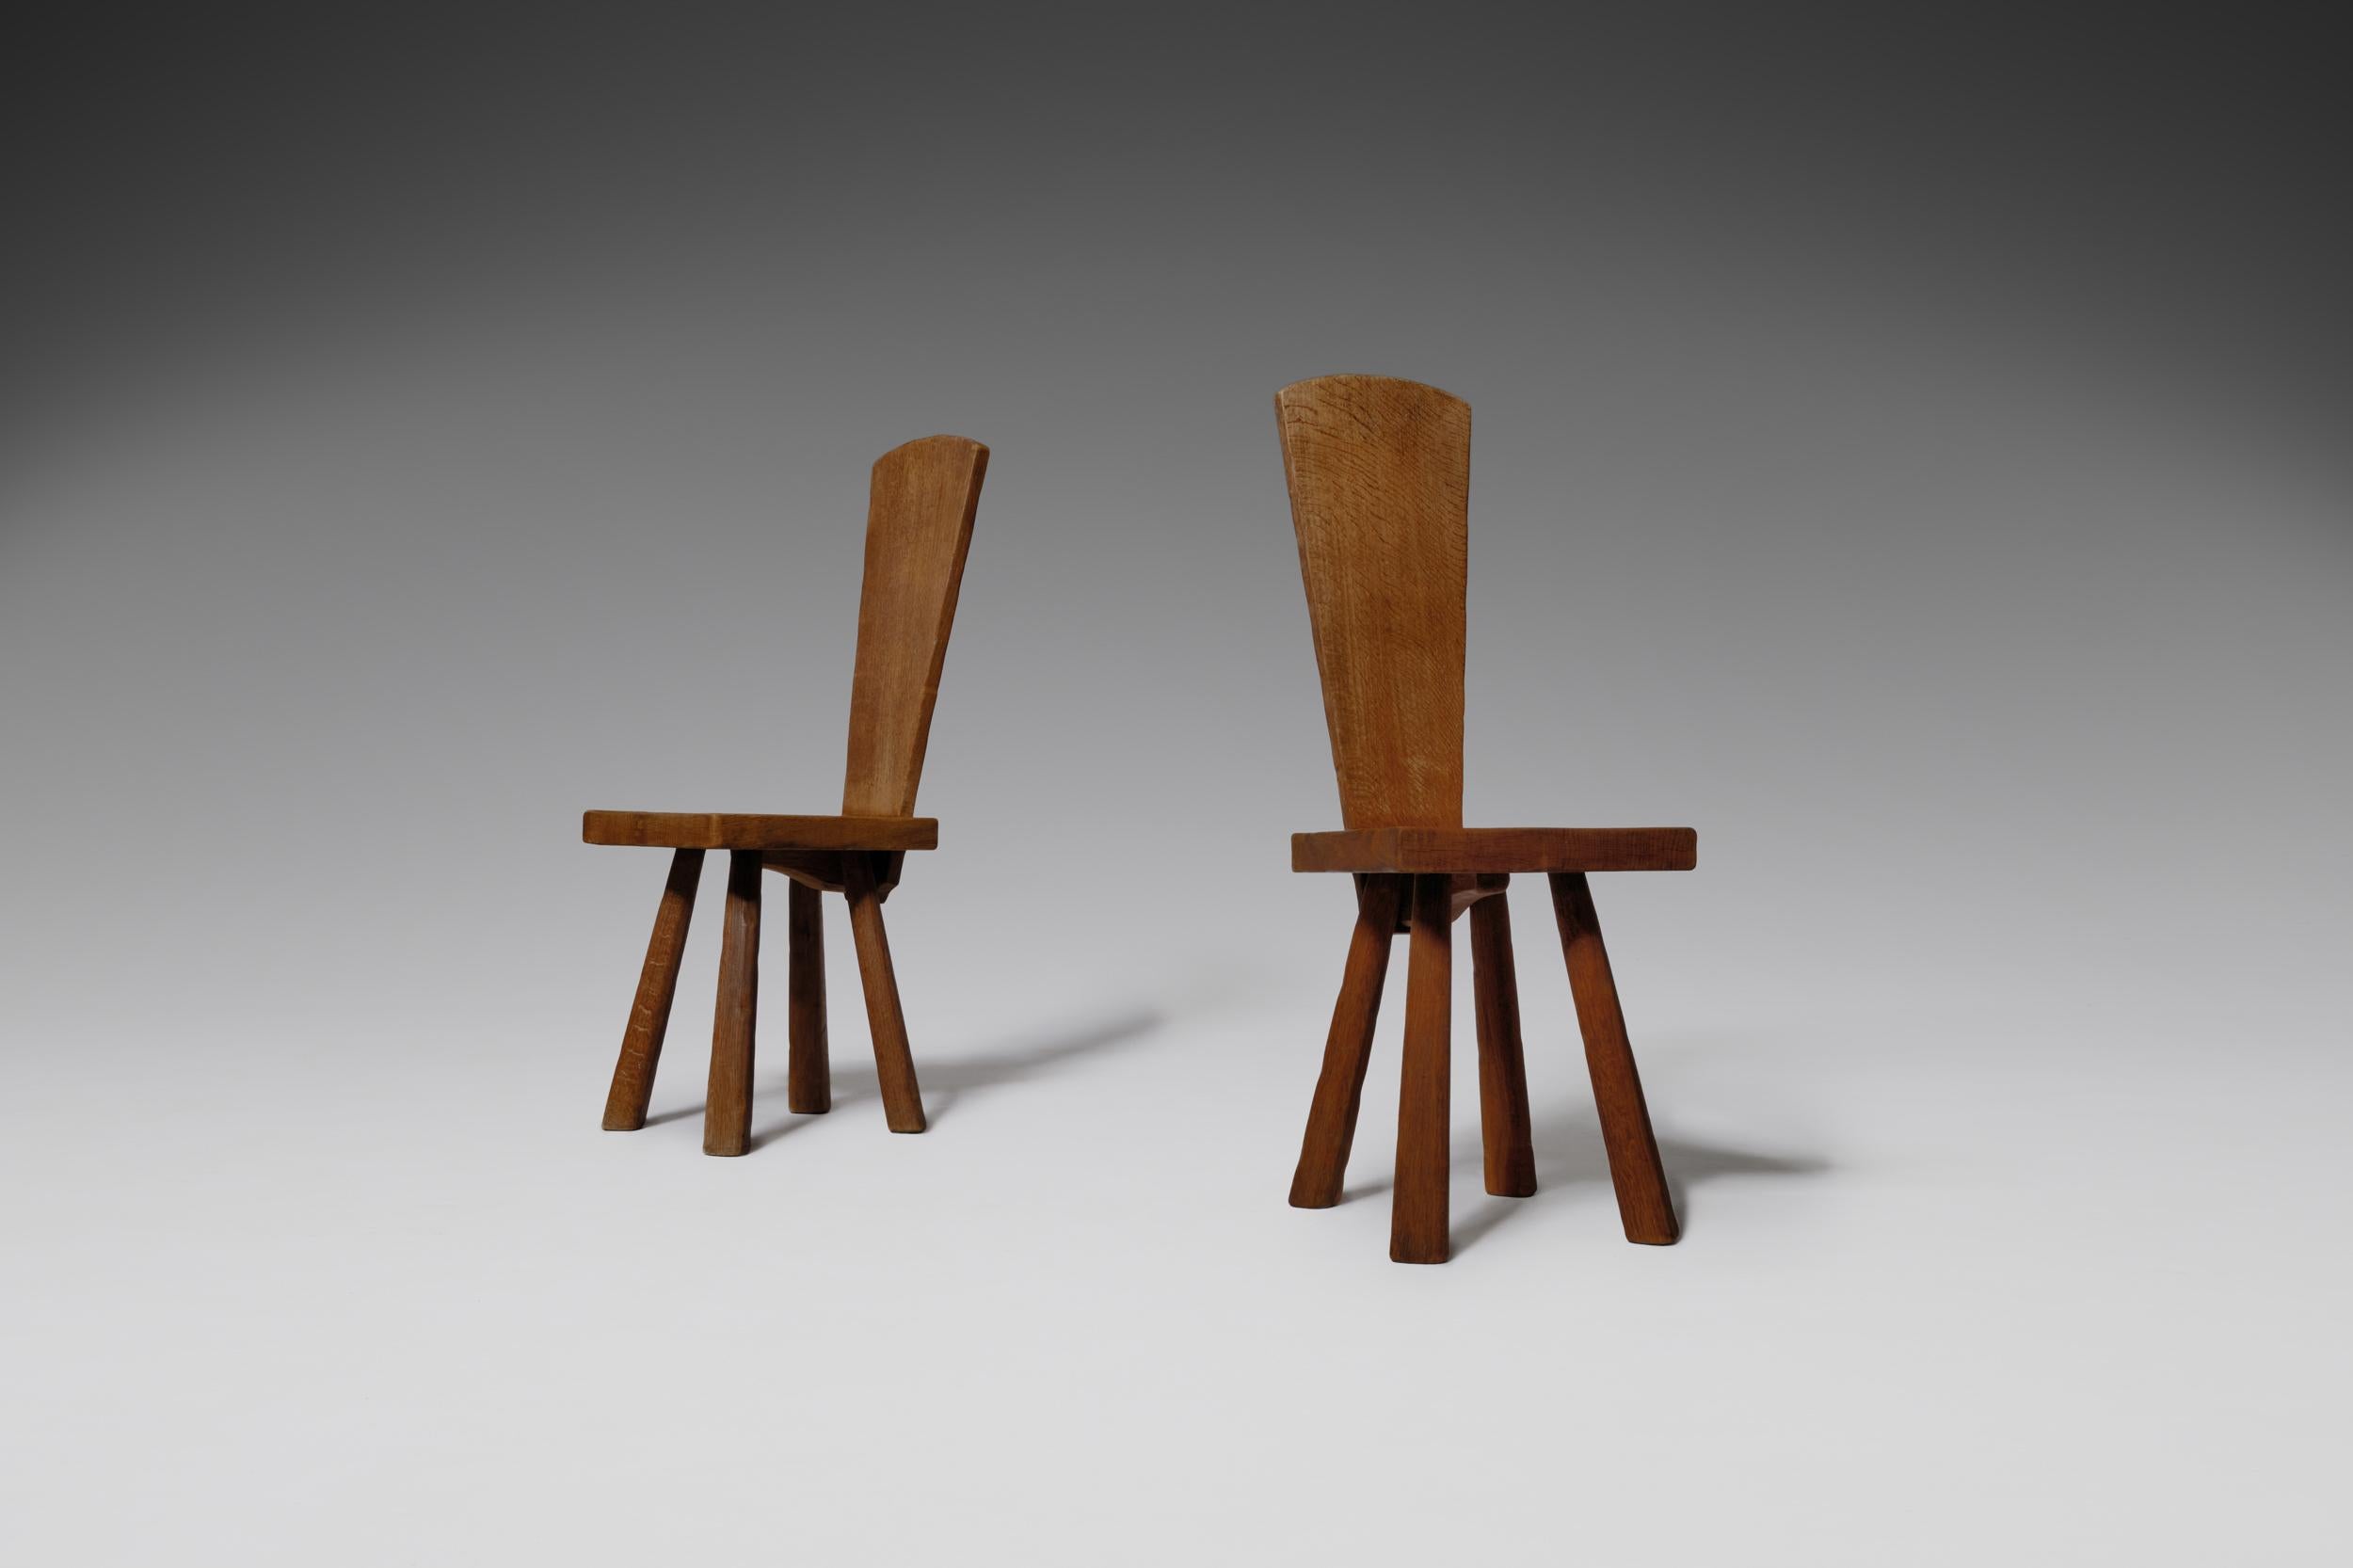 Set of two robust French oak chairs, France 1960s. Simple and elegant chairs handcrafted from solid oak. Nice details such as the such as the wood joints in the seat, the sturdy legs and high backrest. Very decorative object. In good original